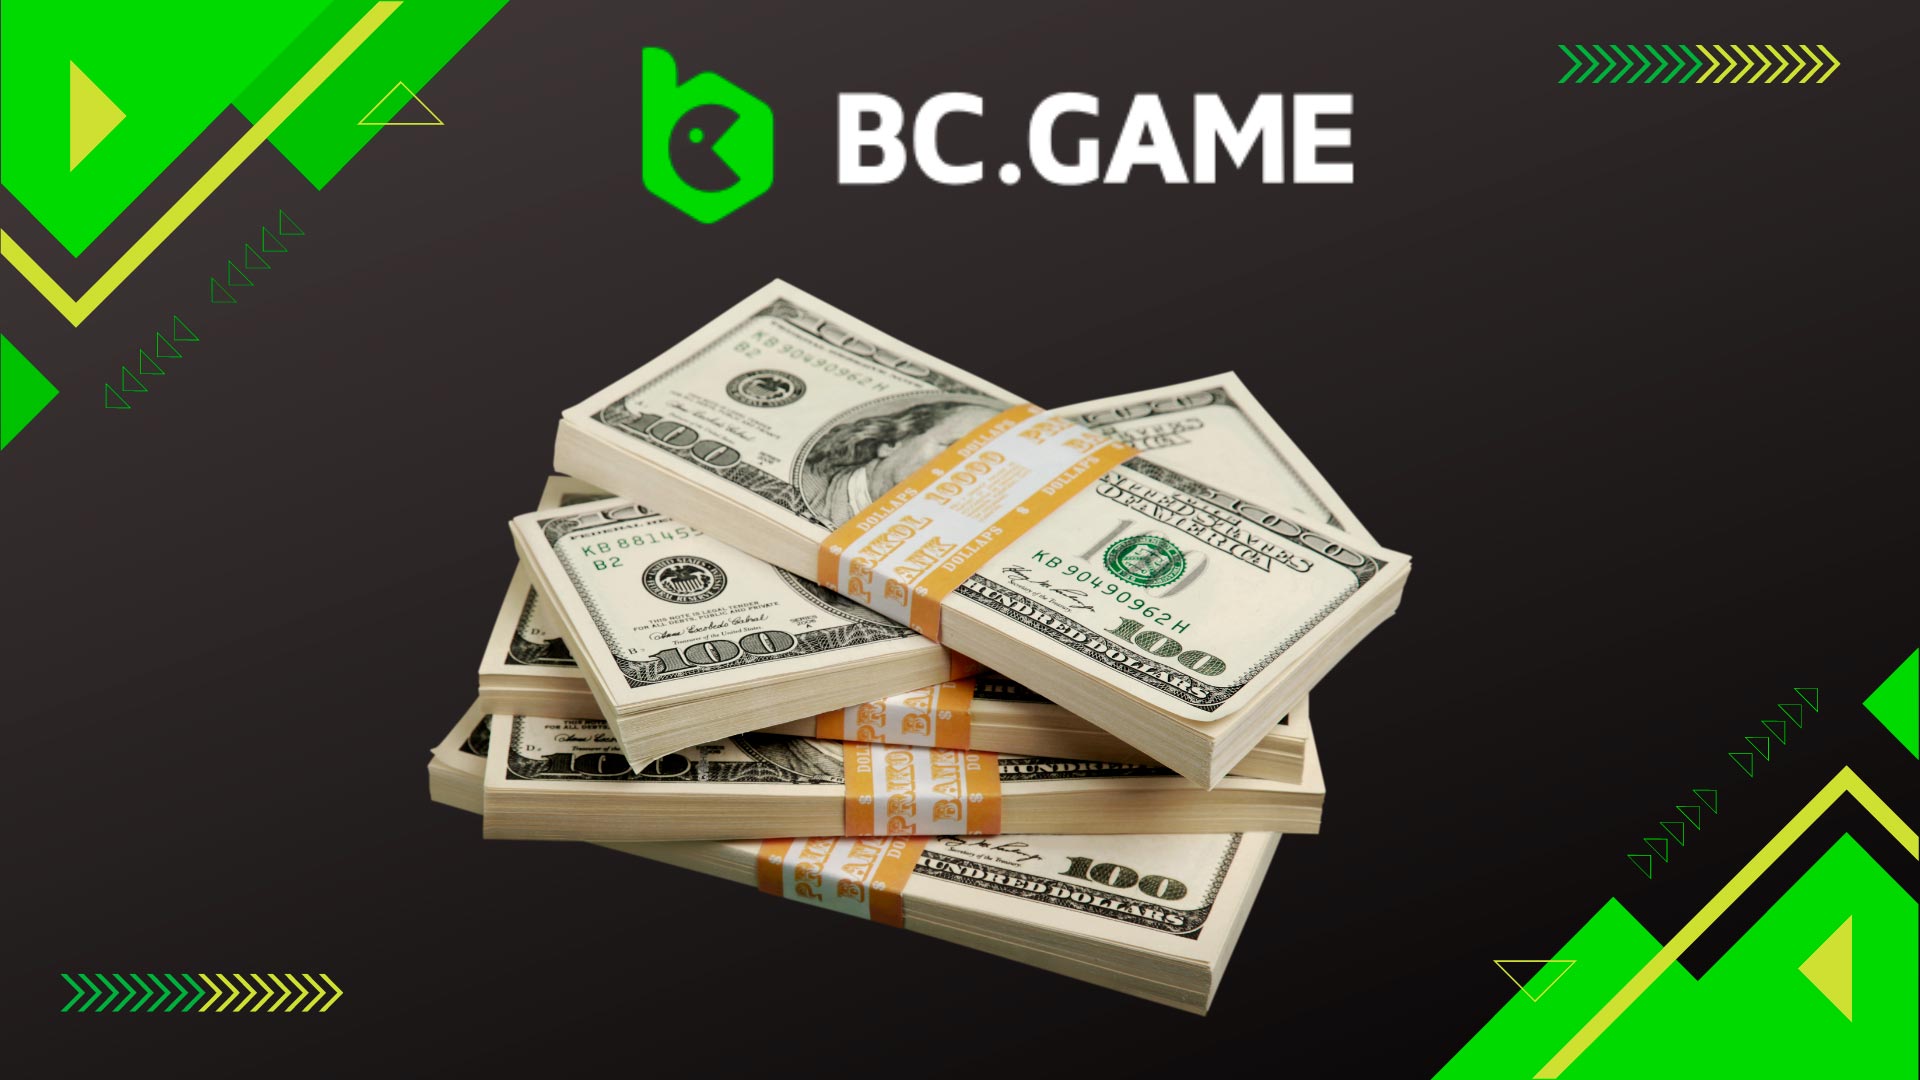 Can You Pass The BC.Game Bonus Test?